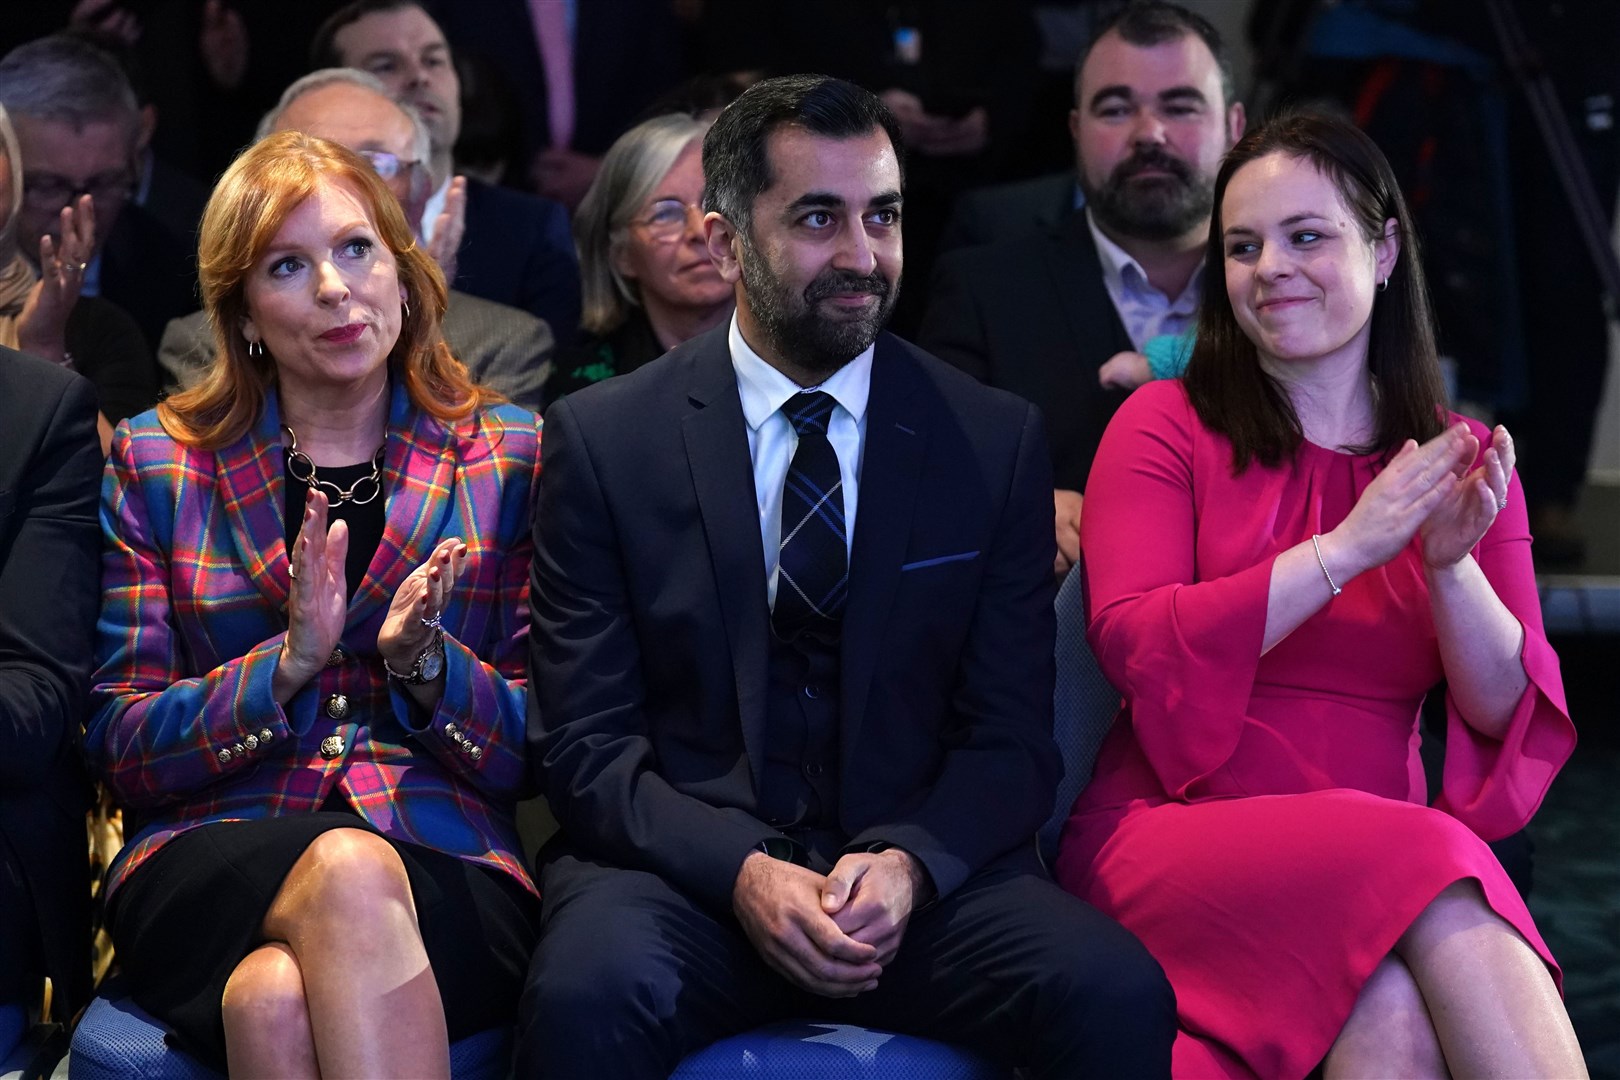 Ash Regan had stood to replace Nicola Sturgeon as SNP leader and Scottish first minister earlier this year – but lost out, with Humza Yousaf elected into the role (Andrew Milligan/PA)